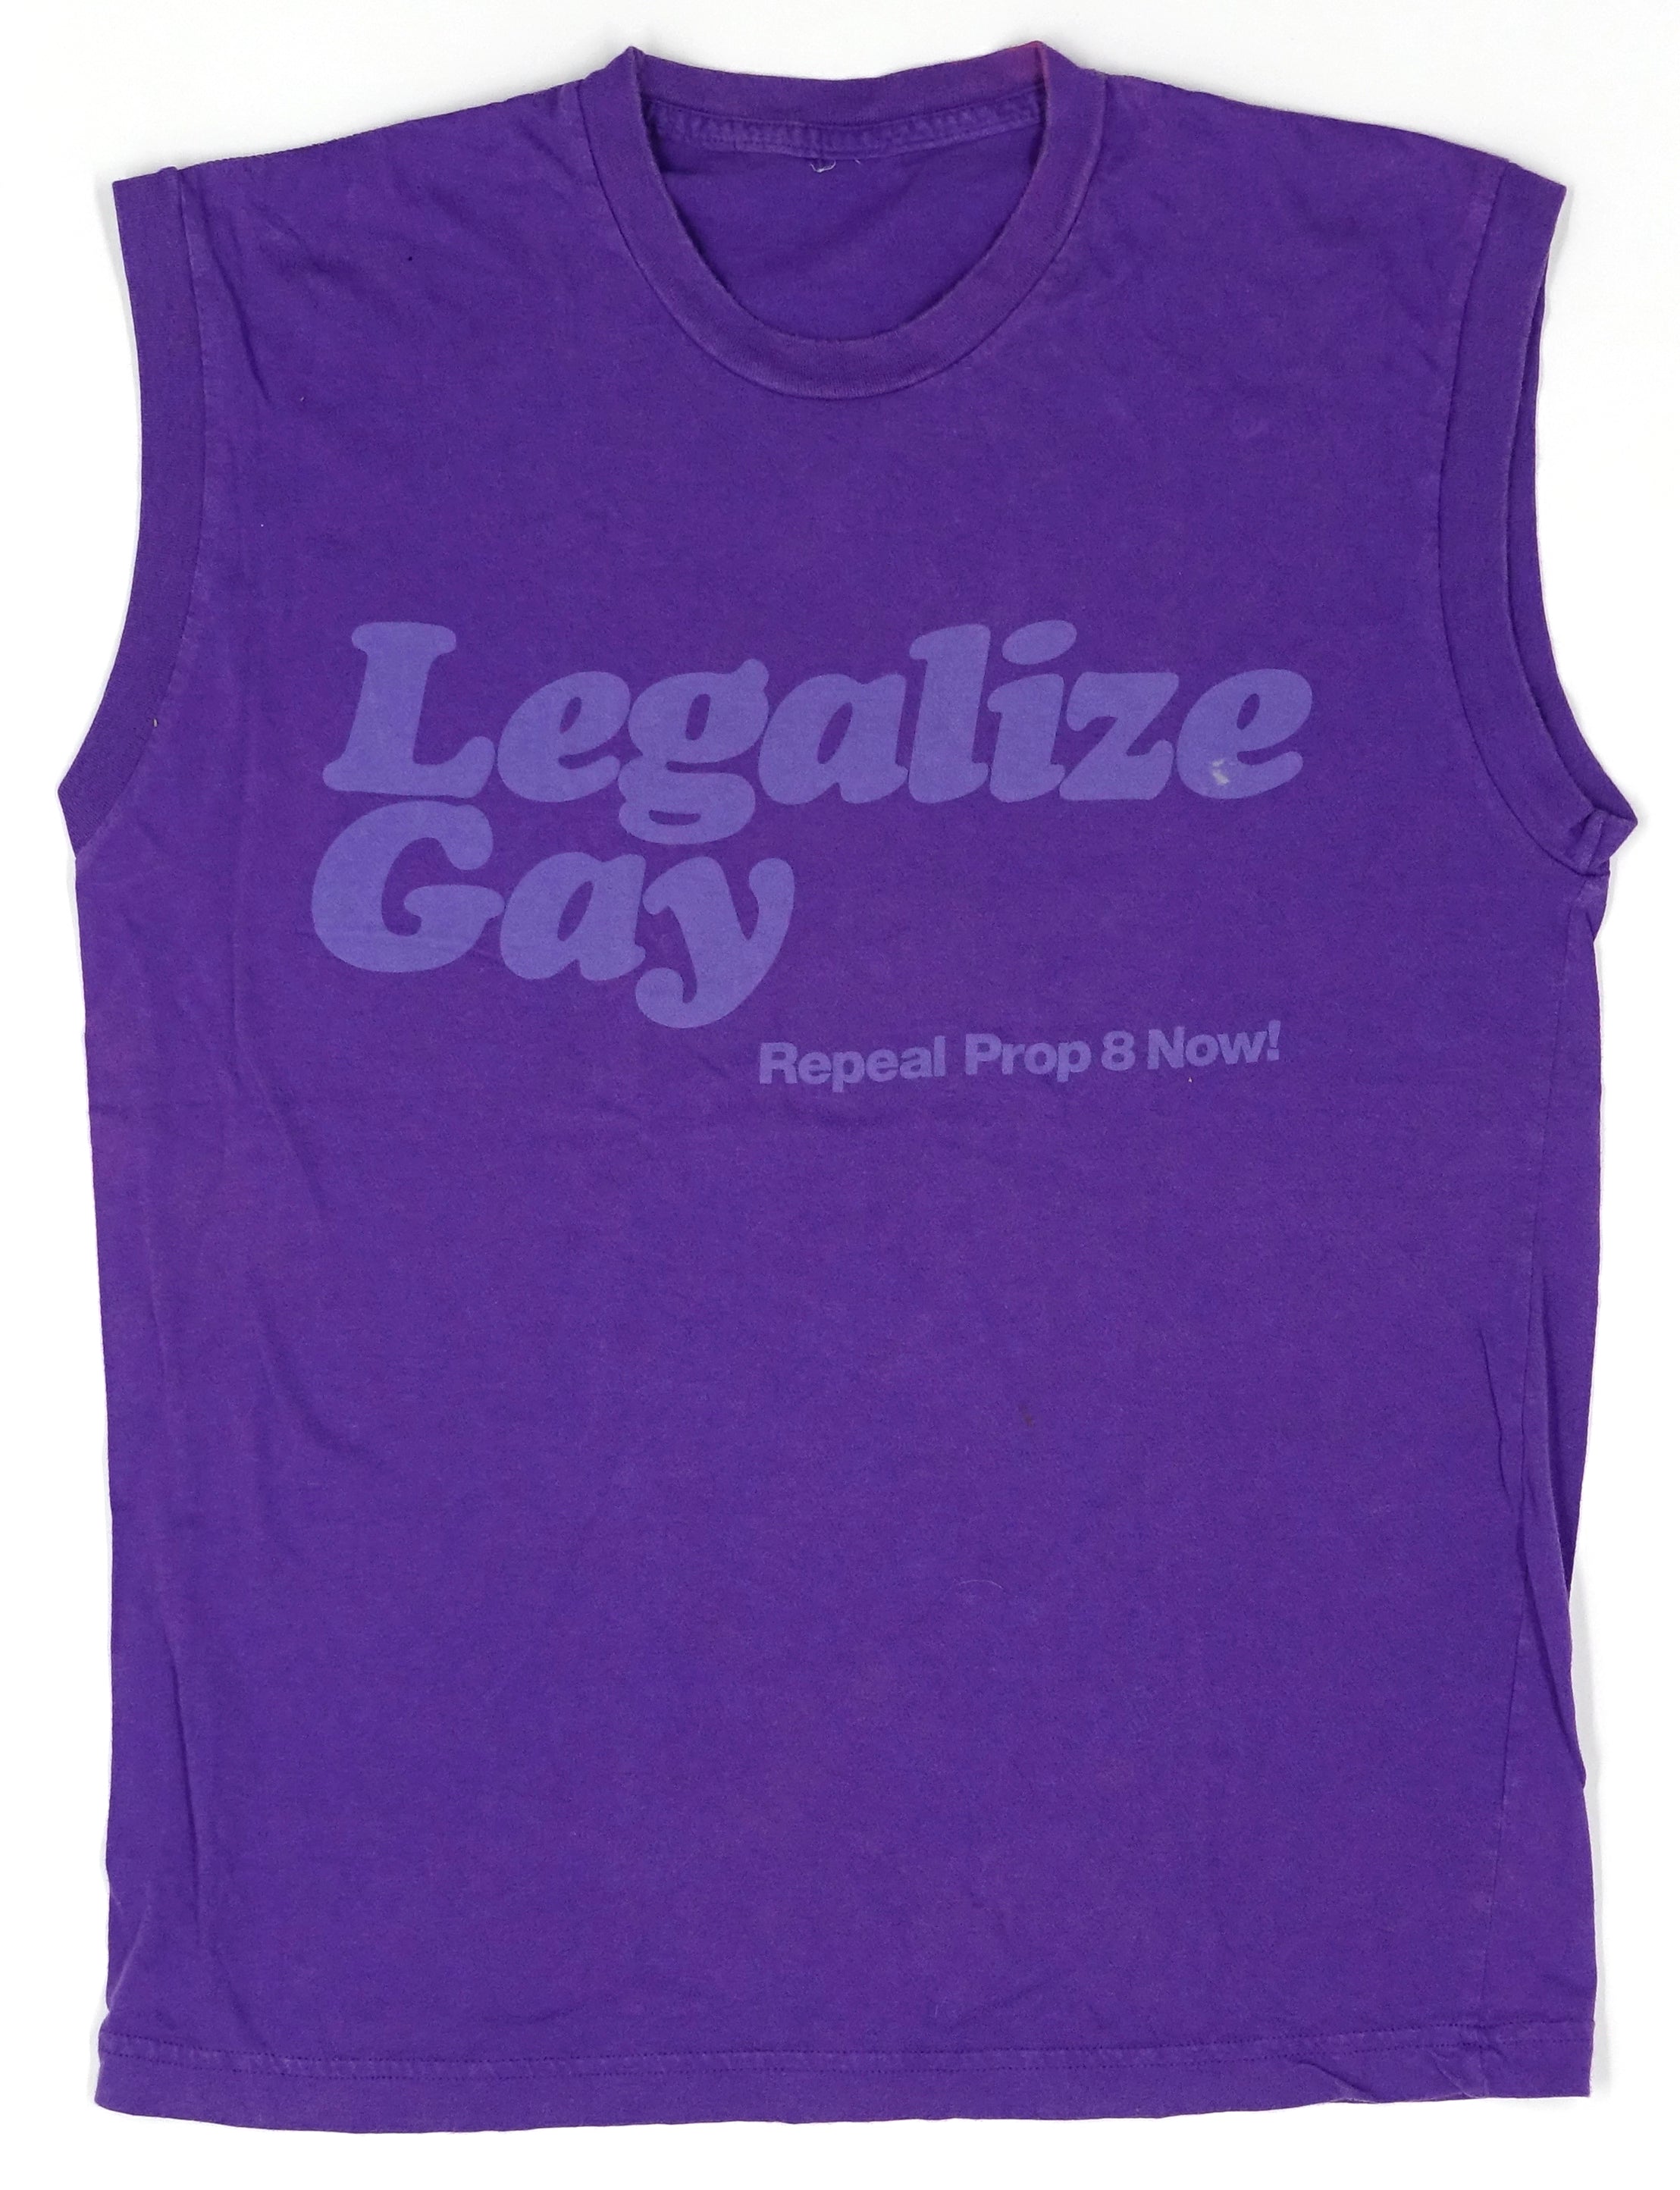 Legalize Gay - Repeal Prop 8 Sleeveless Shirt Size Large